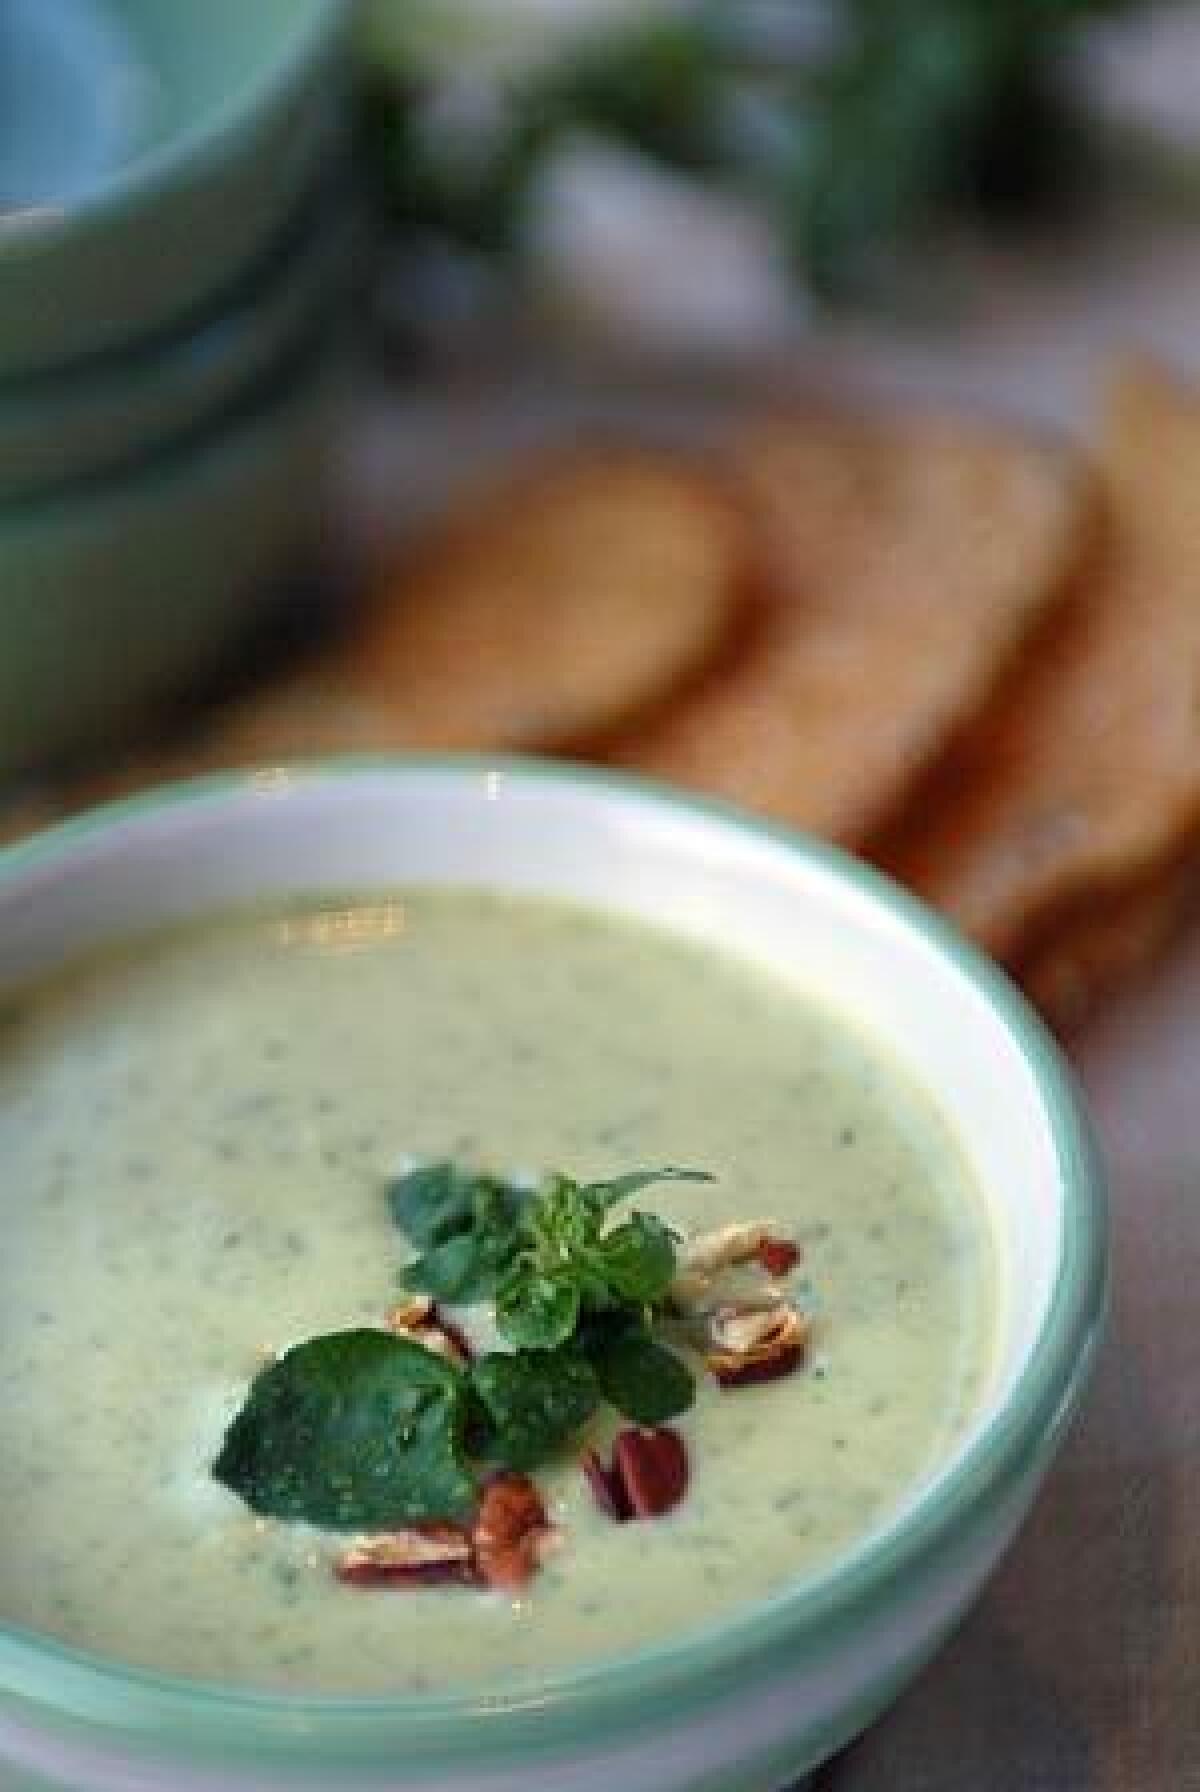 MORE THAN A GARNISH: Add watercress to a sophisticated soup with Stilton and pecans. The leaves wilt just enough to mellow their bite without losing their gorgeous green color.